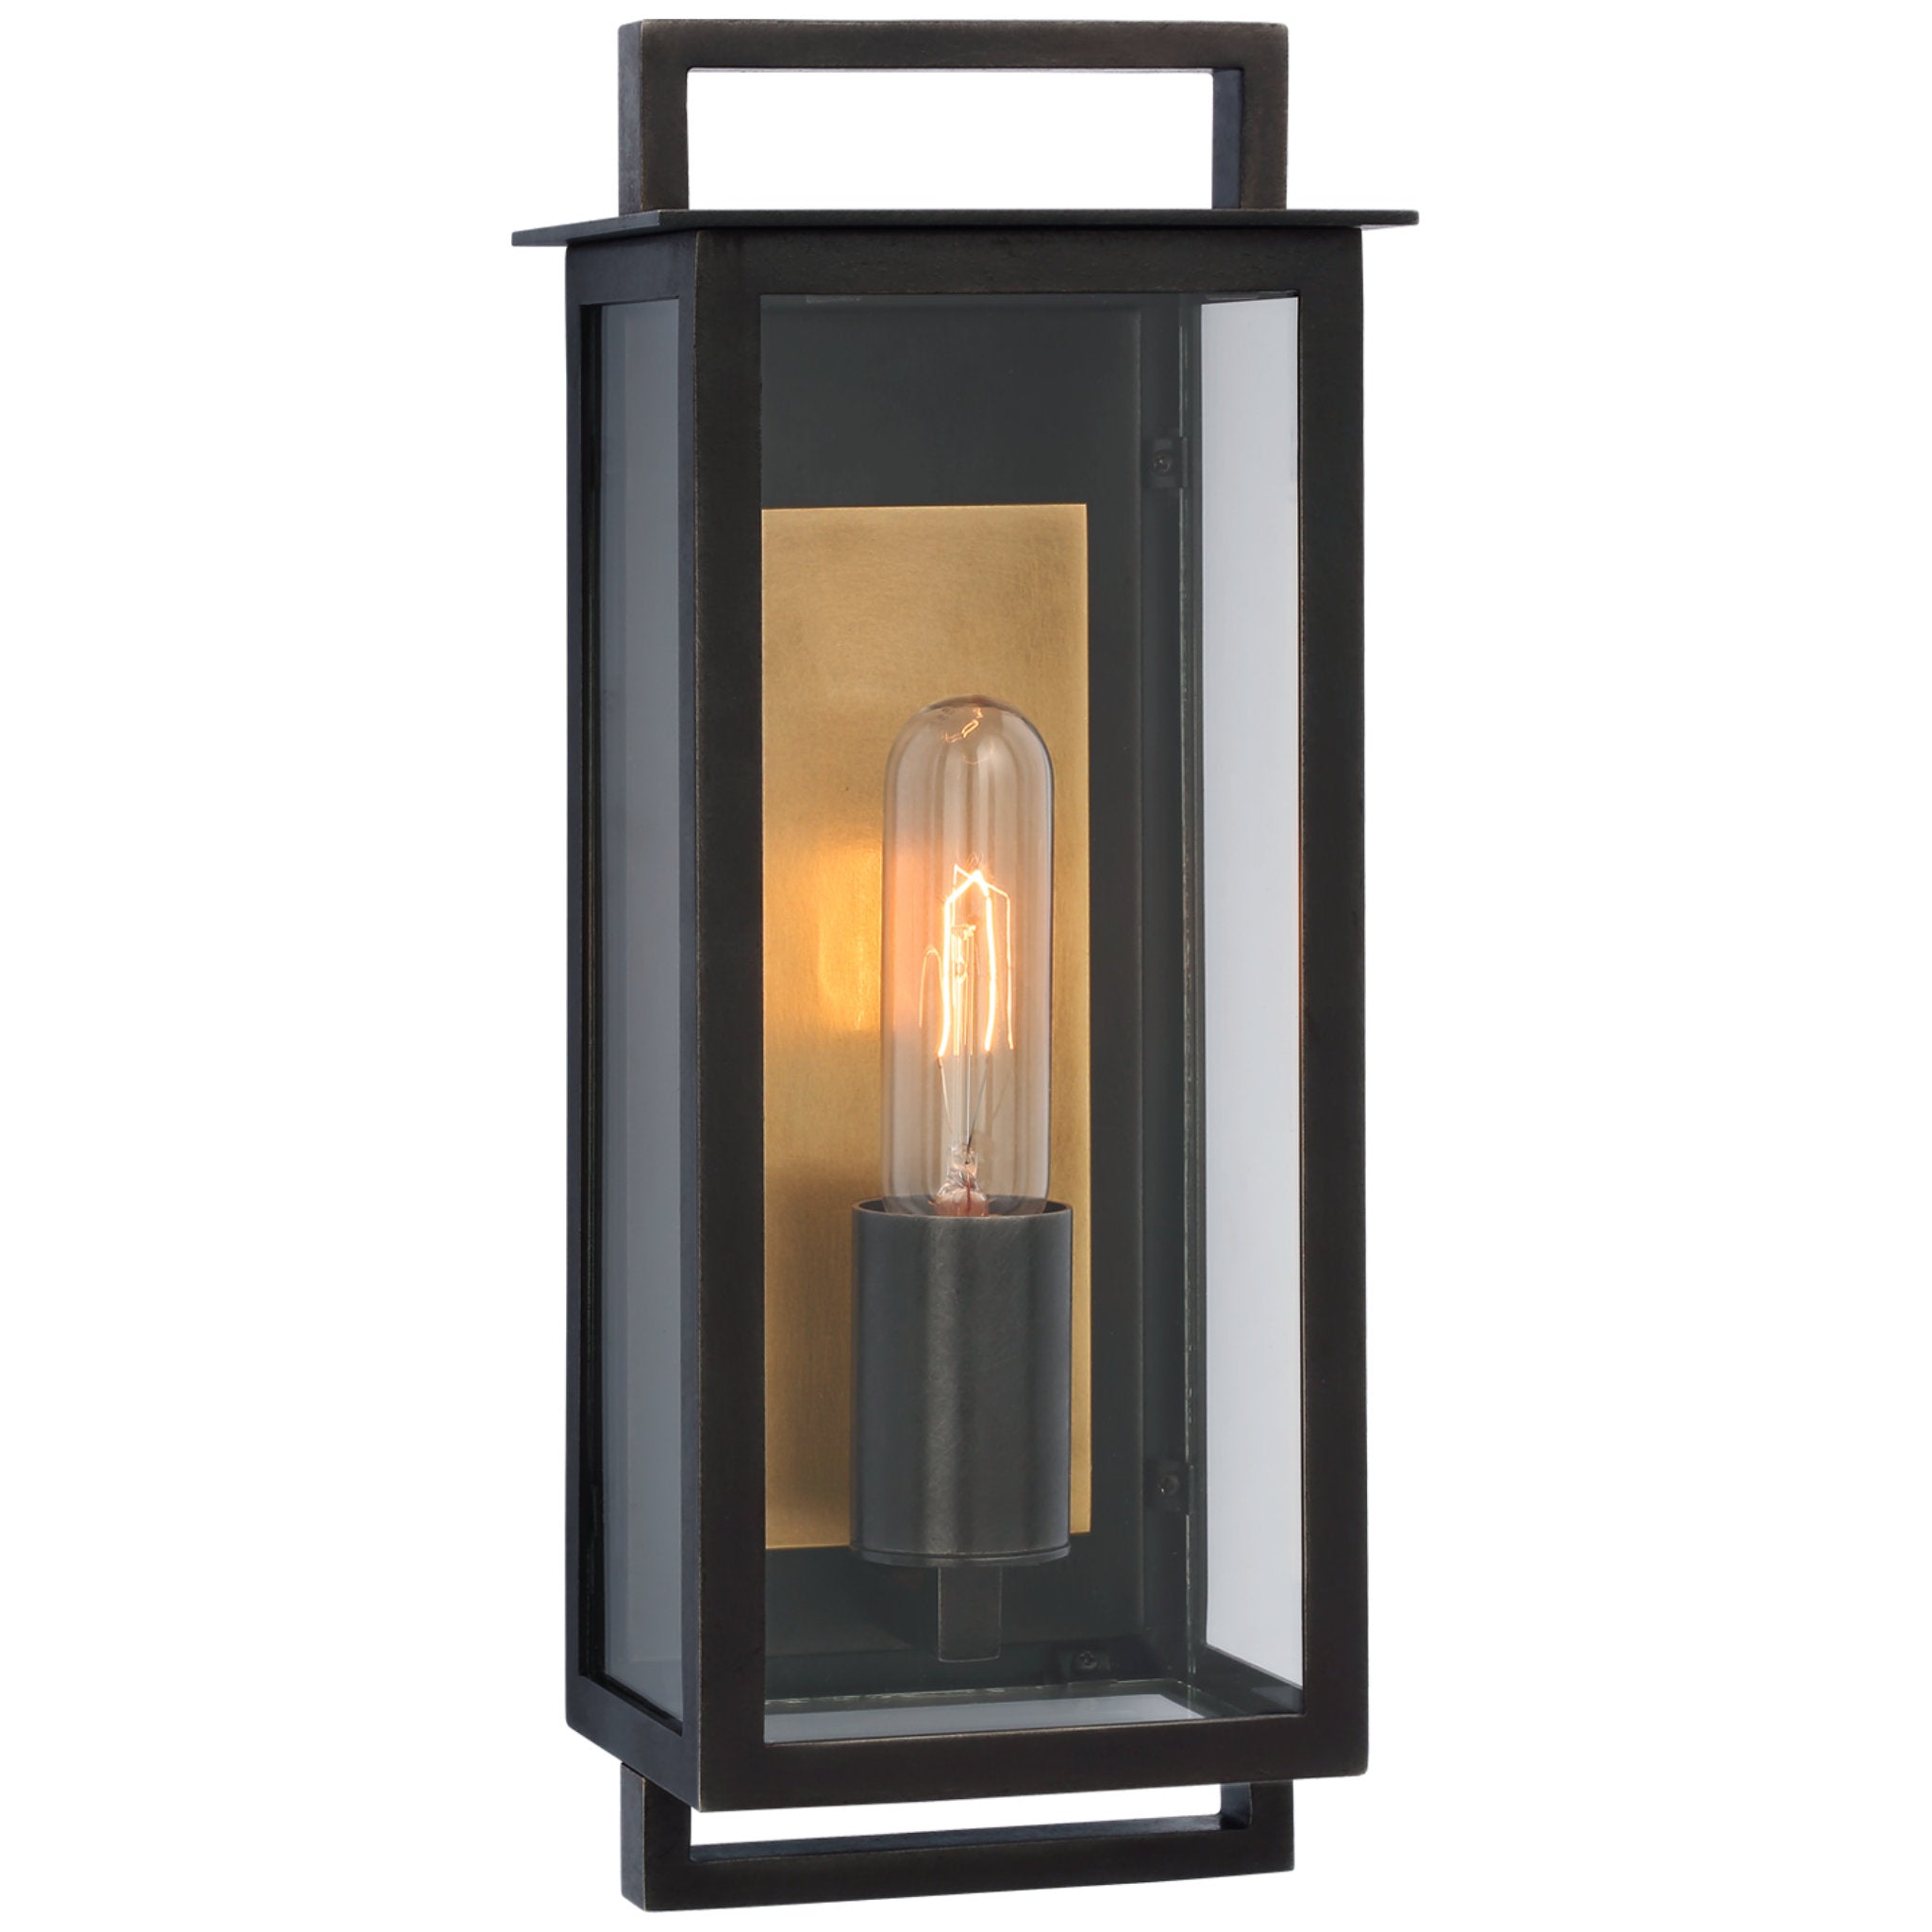 Ian K. Fowler Halle Small Narrow Wall Lantern in Aged Iron with Clear Glass